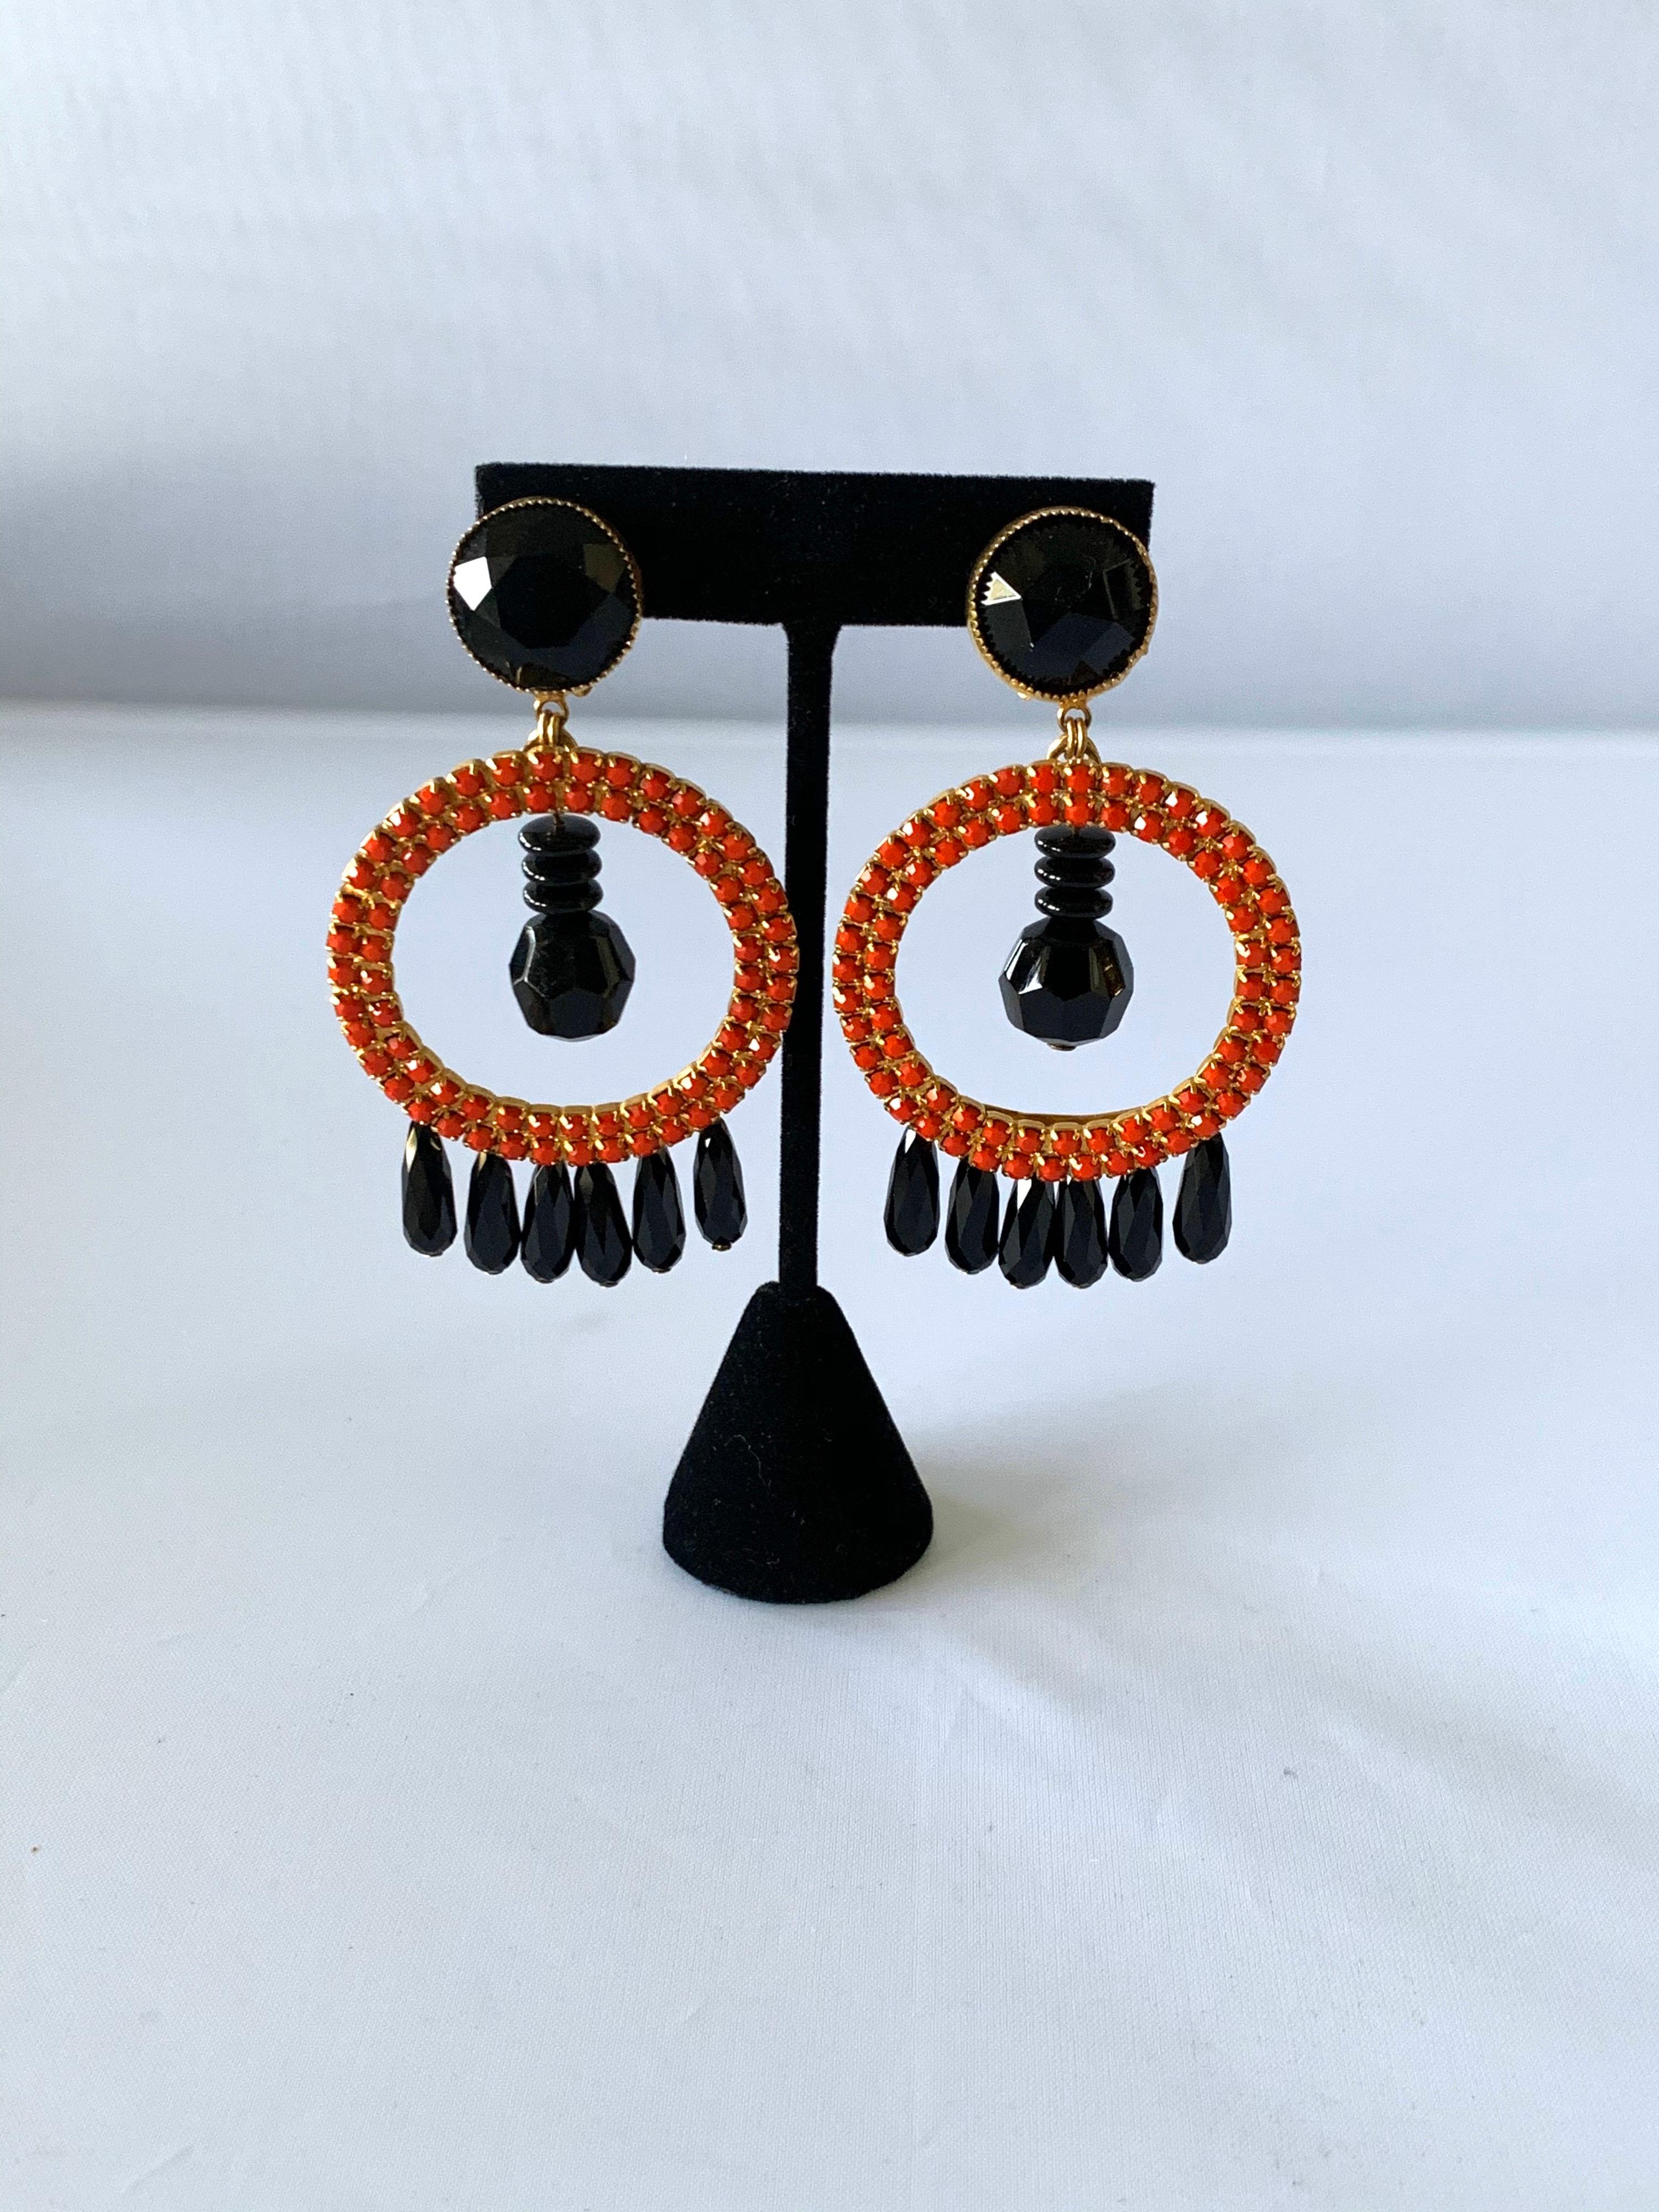 Contemporary chic orange-red black jet vintage statement clip-on earrings, comprised out of gold-tone metal which is adorned by rhinestones and dangling faceted jet beads. Designed by William de Lillo for W. de Lillo, Ltd New York, circa 1969/70.